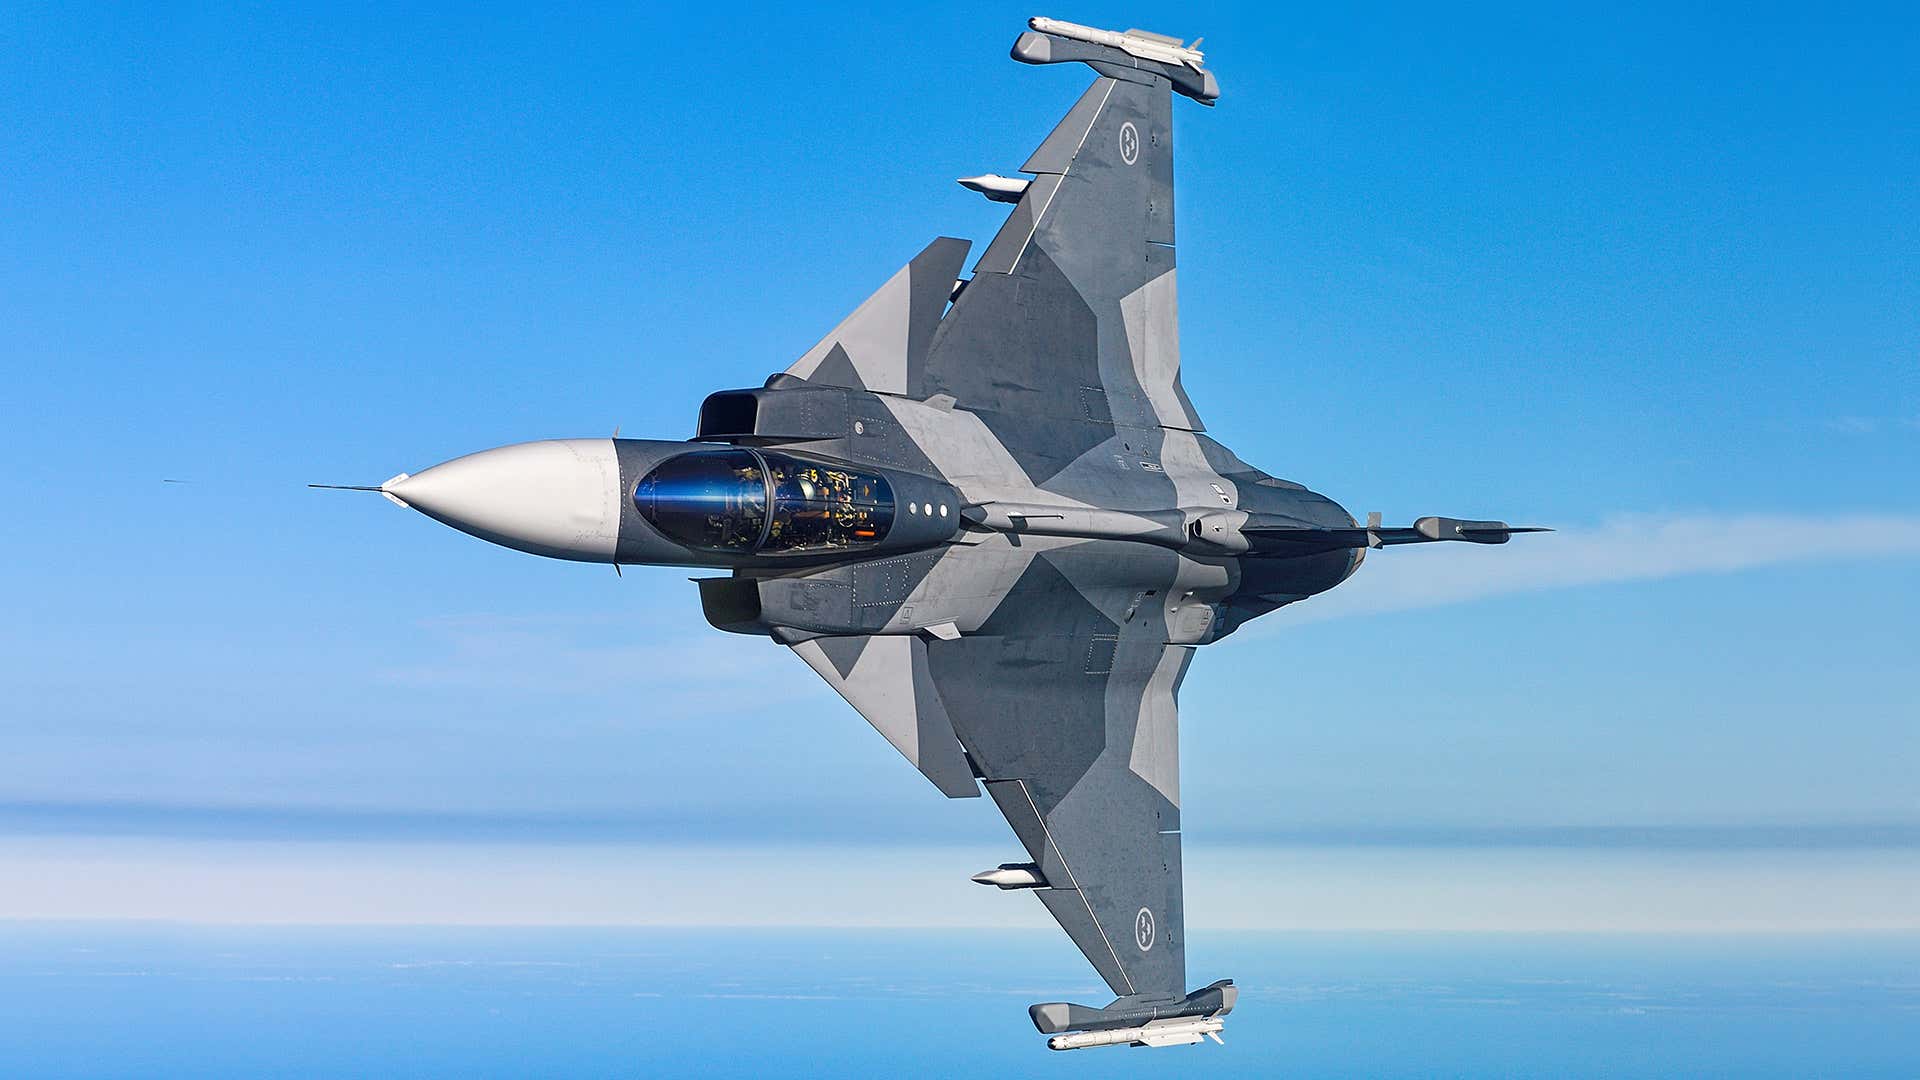 Sweden S Bigger Badder Gripen Fighter Packs A Lot Of Punch In An Incredibly Efficient Package